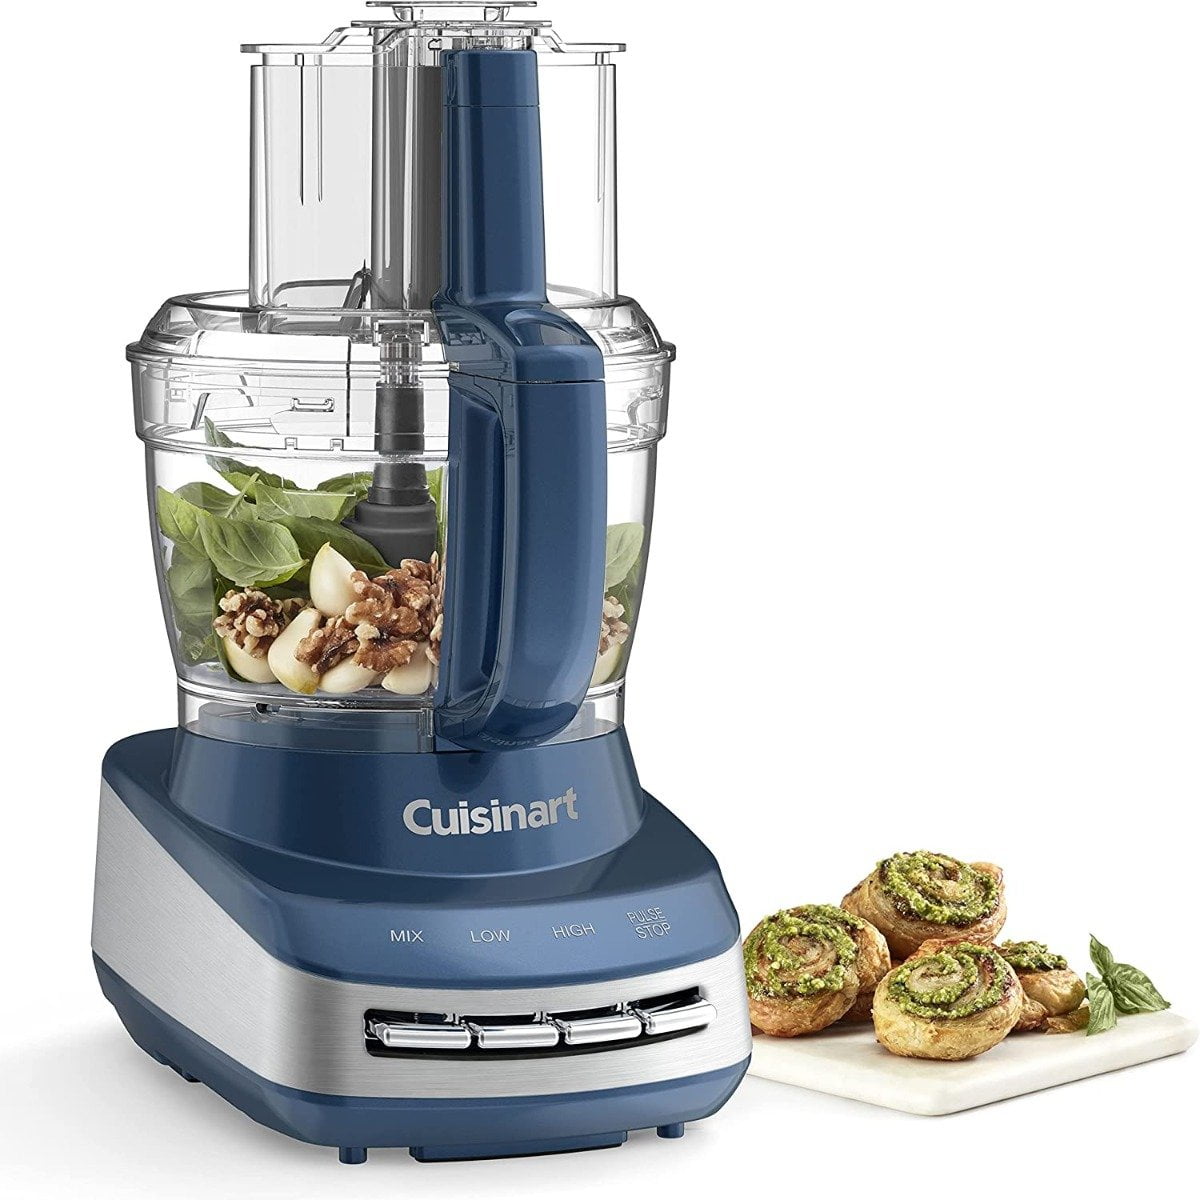 NEW Cuisinart 13 piece gadget set compare to Walmart! - household items -  by owner - housewares sale - craigslist